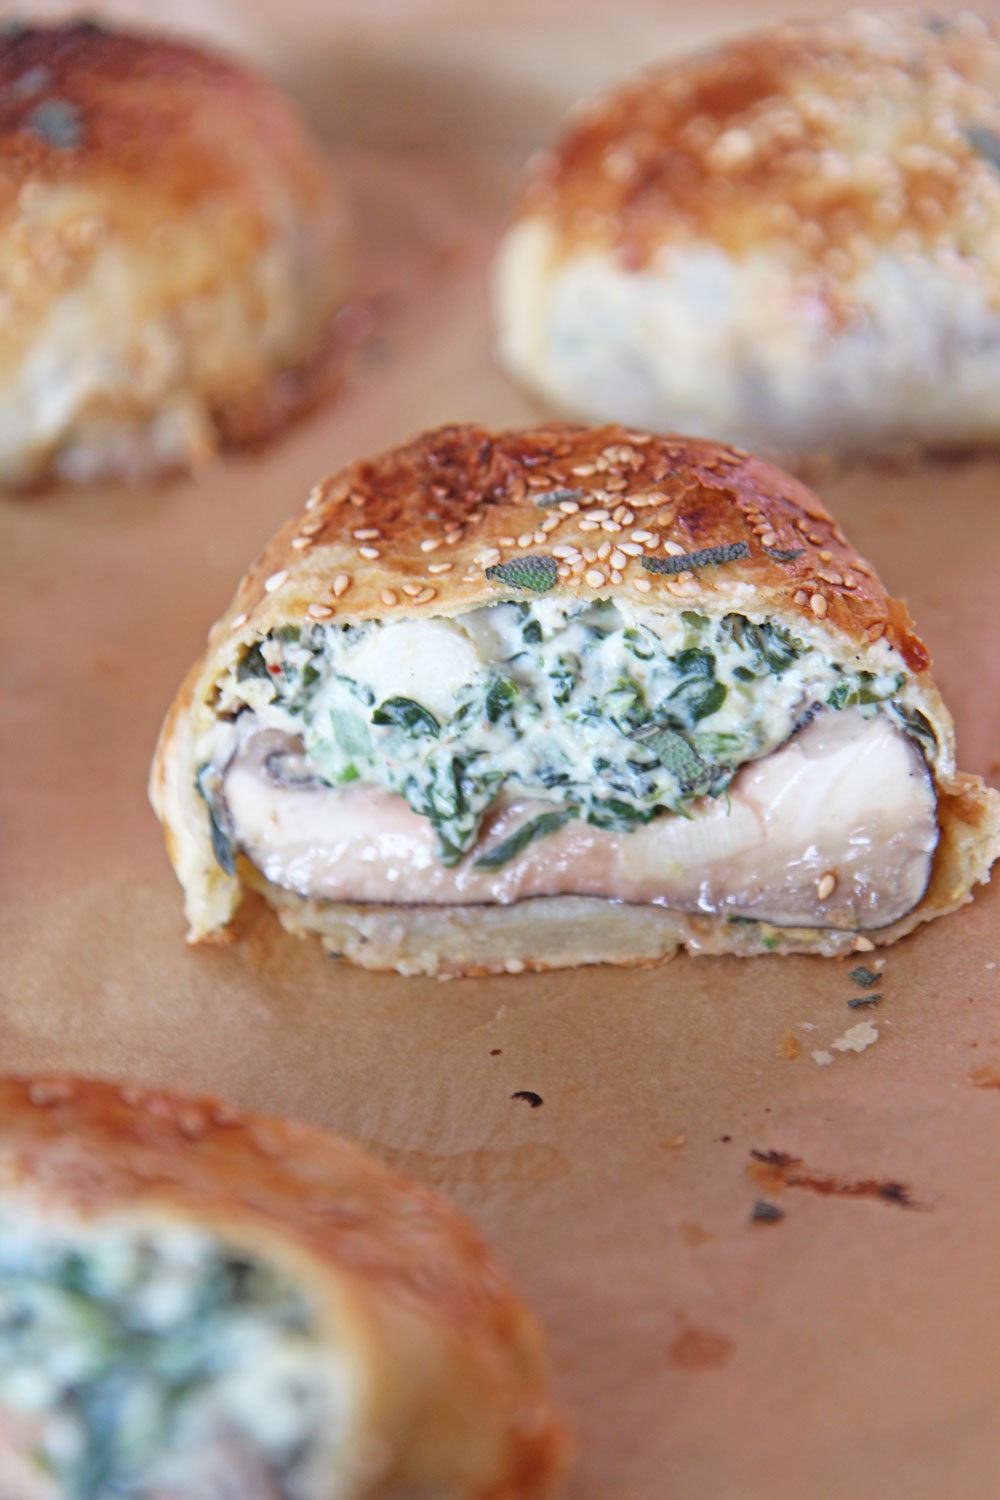 Stuffed Mushroom Wellington Recipe. Grab portabella mushrooms, spinach, cheese, and lots of herbs. This is my favorite holiday appetizer made into a puff pastry wrapped sheet pan dinner. Happy Cooking! #wellington #stuffedmushrooms